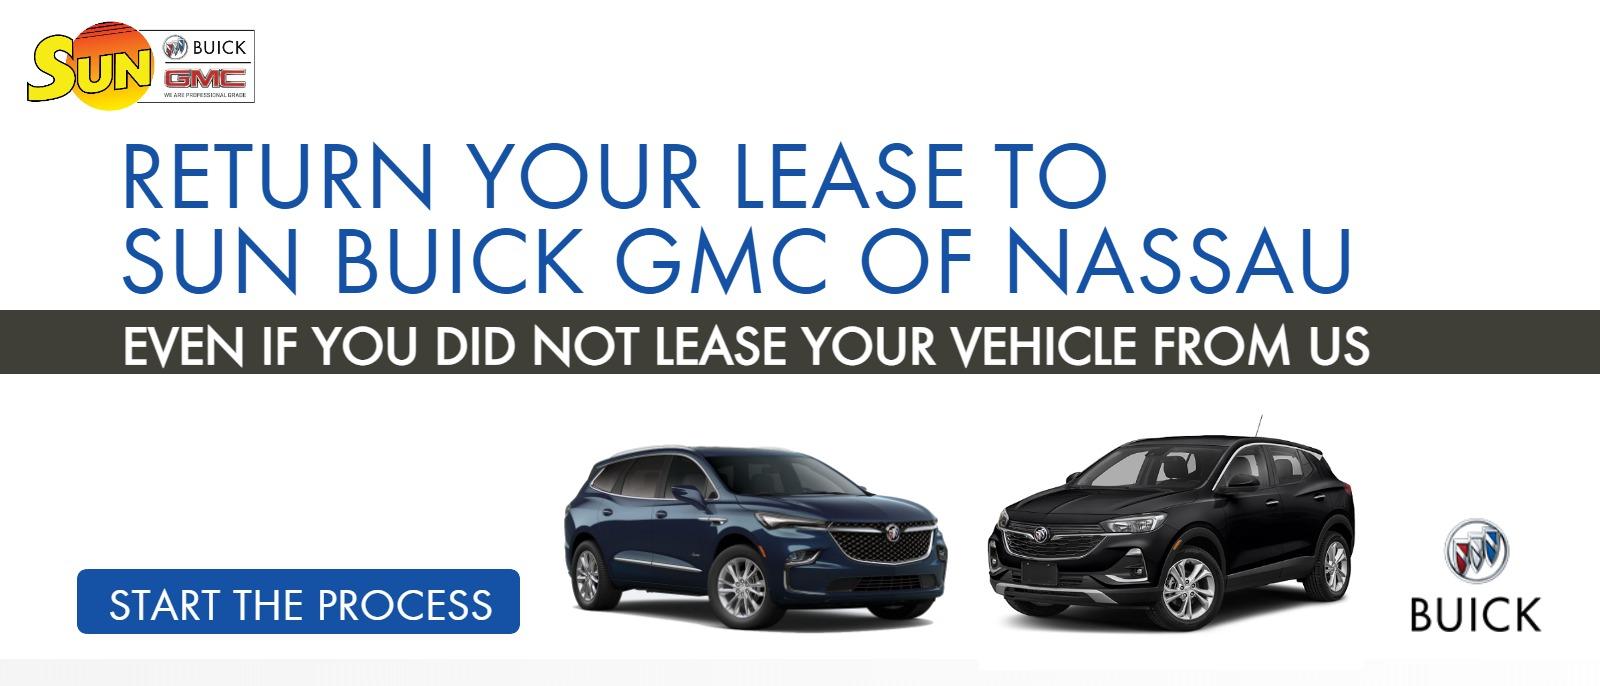 RETURN YOUR LEASE TO SUN BUICK GMC OF NASSAU 
EVEN IF YOU DID NOT LEASE YOUR VEHICLE FROM US